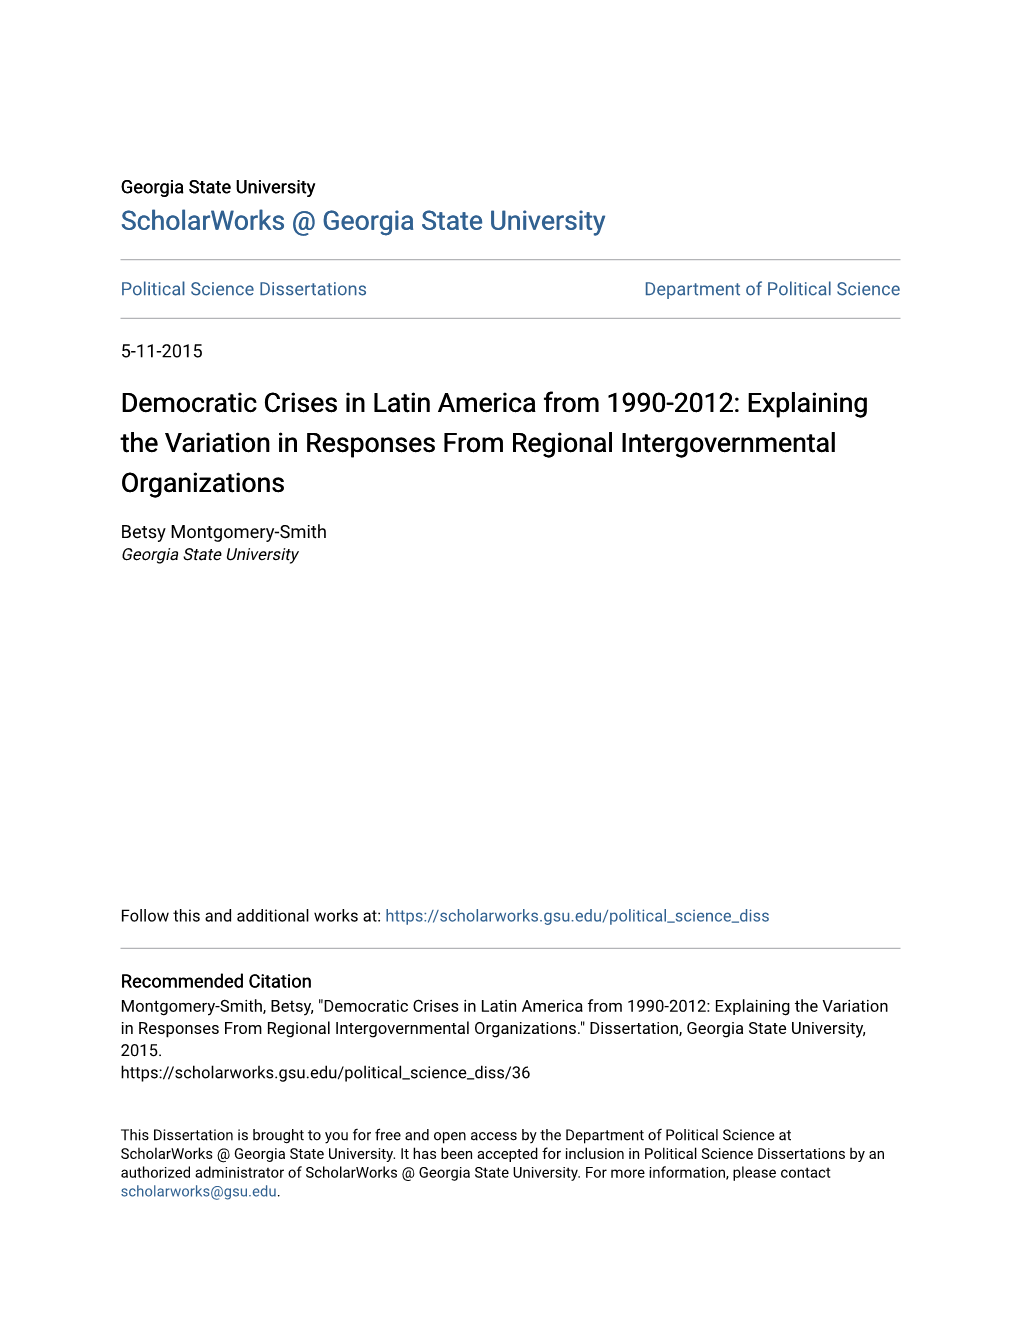 Democratic Crises in Latin America from 1990-2012: Explaining the Variation in Responses from Regional Intergovernmental Organizations